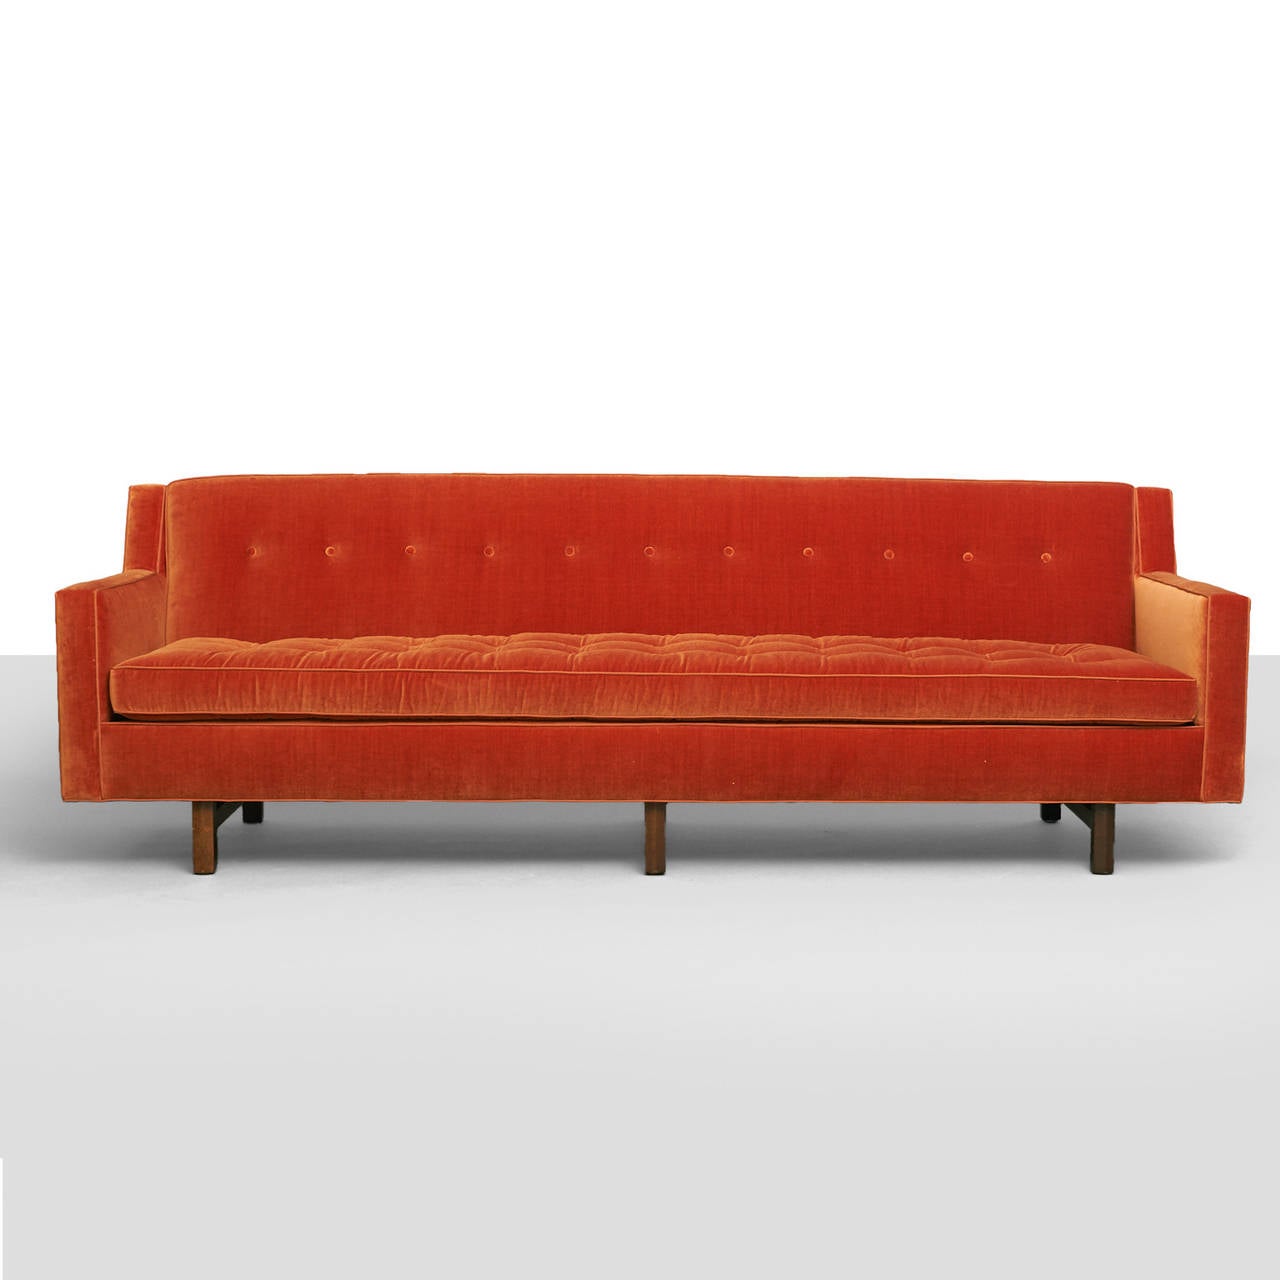 A long, tufted sofa by Edward Wormley recently restored in a George Spencer paprika color velvet with contrast silk trim and six mahogany legs.